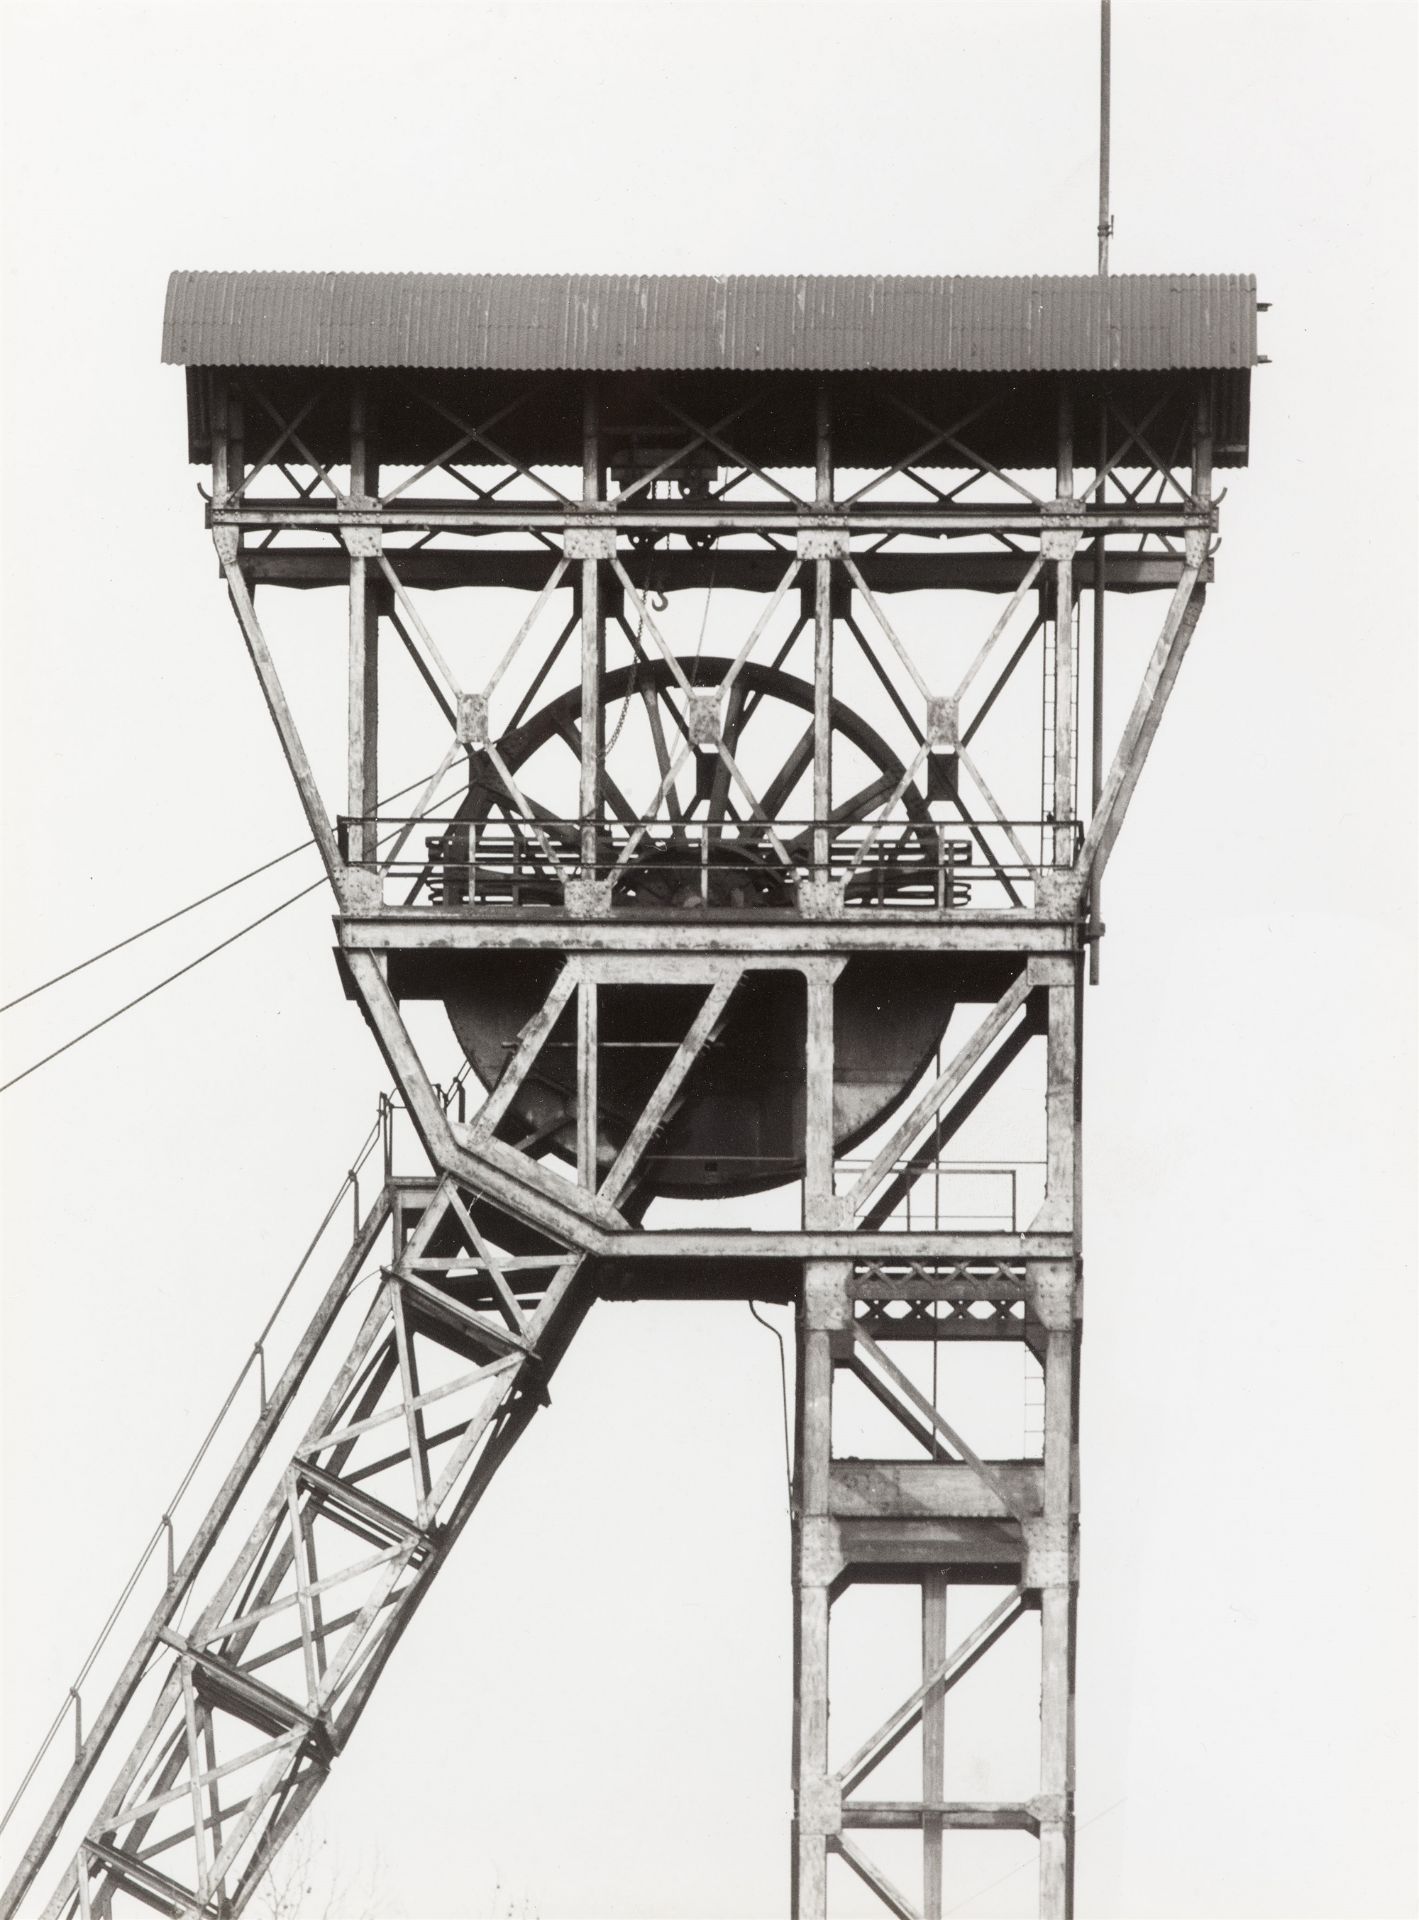 Bernd and Hilla Becher, Winding towers - Image 11 of 14